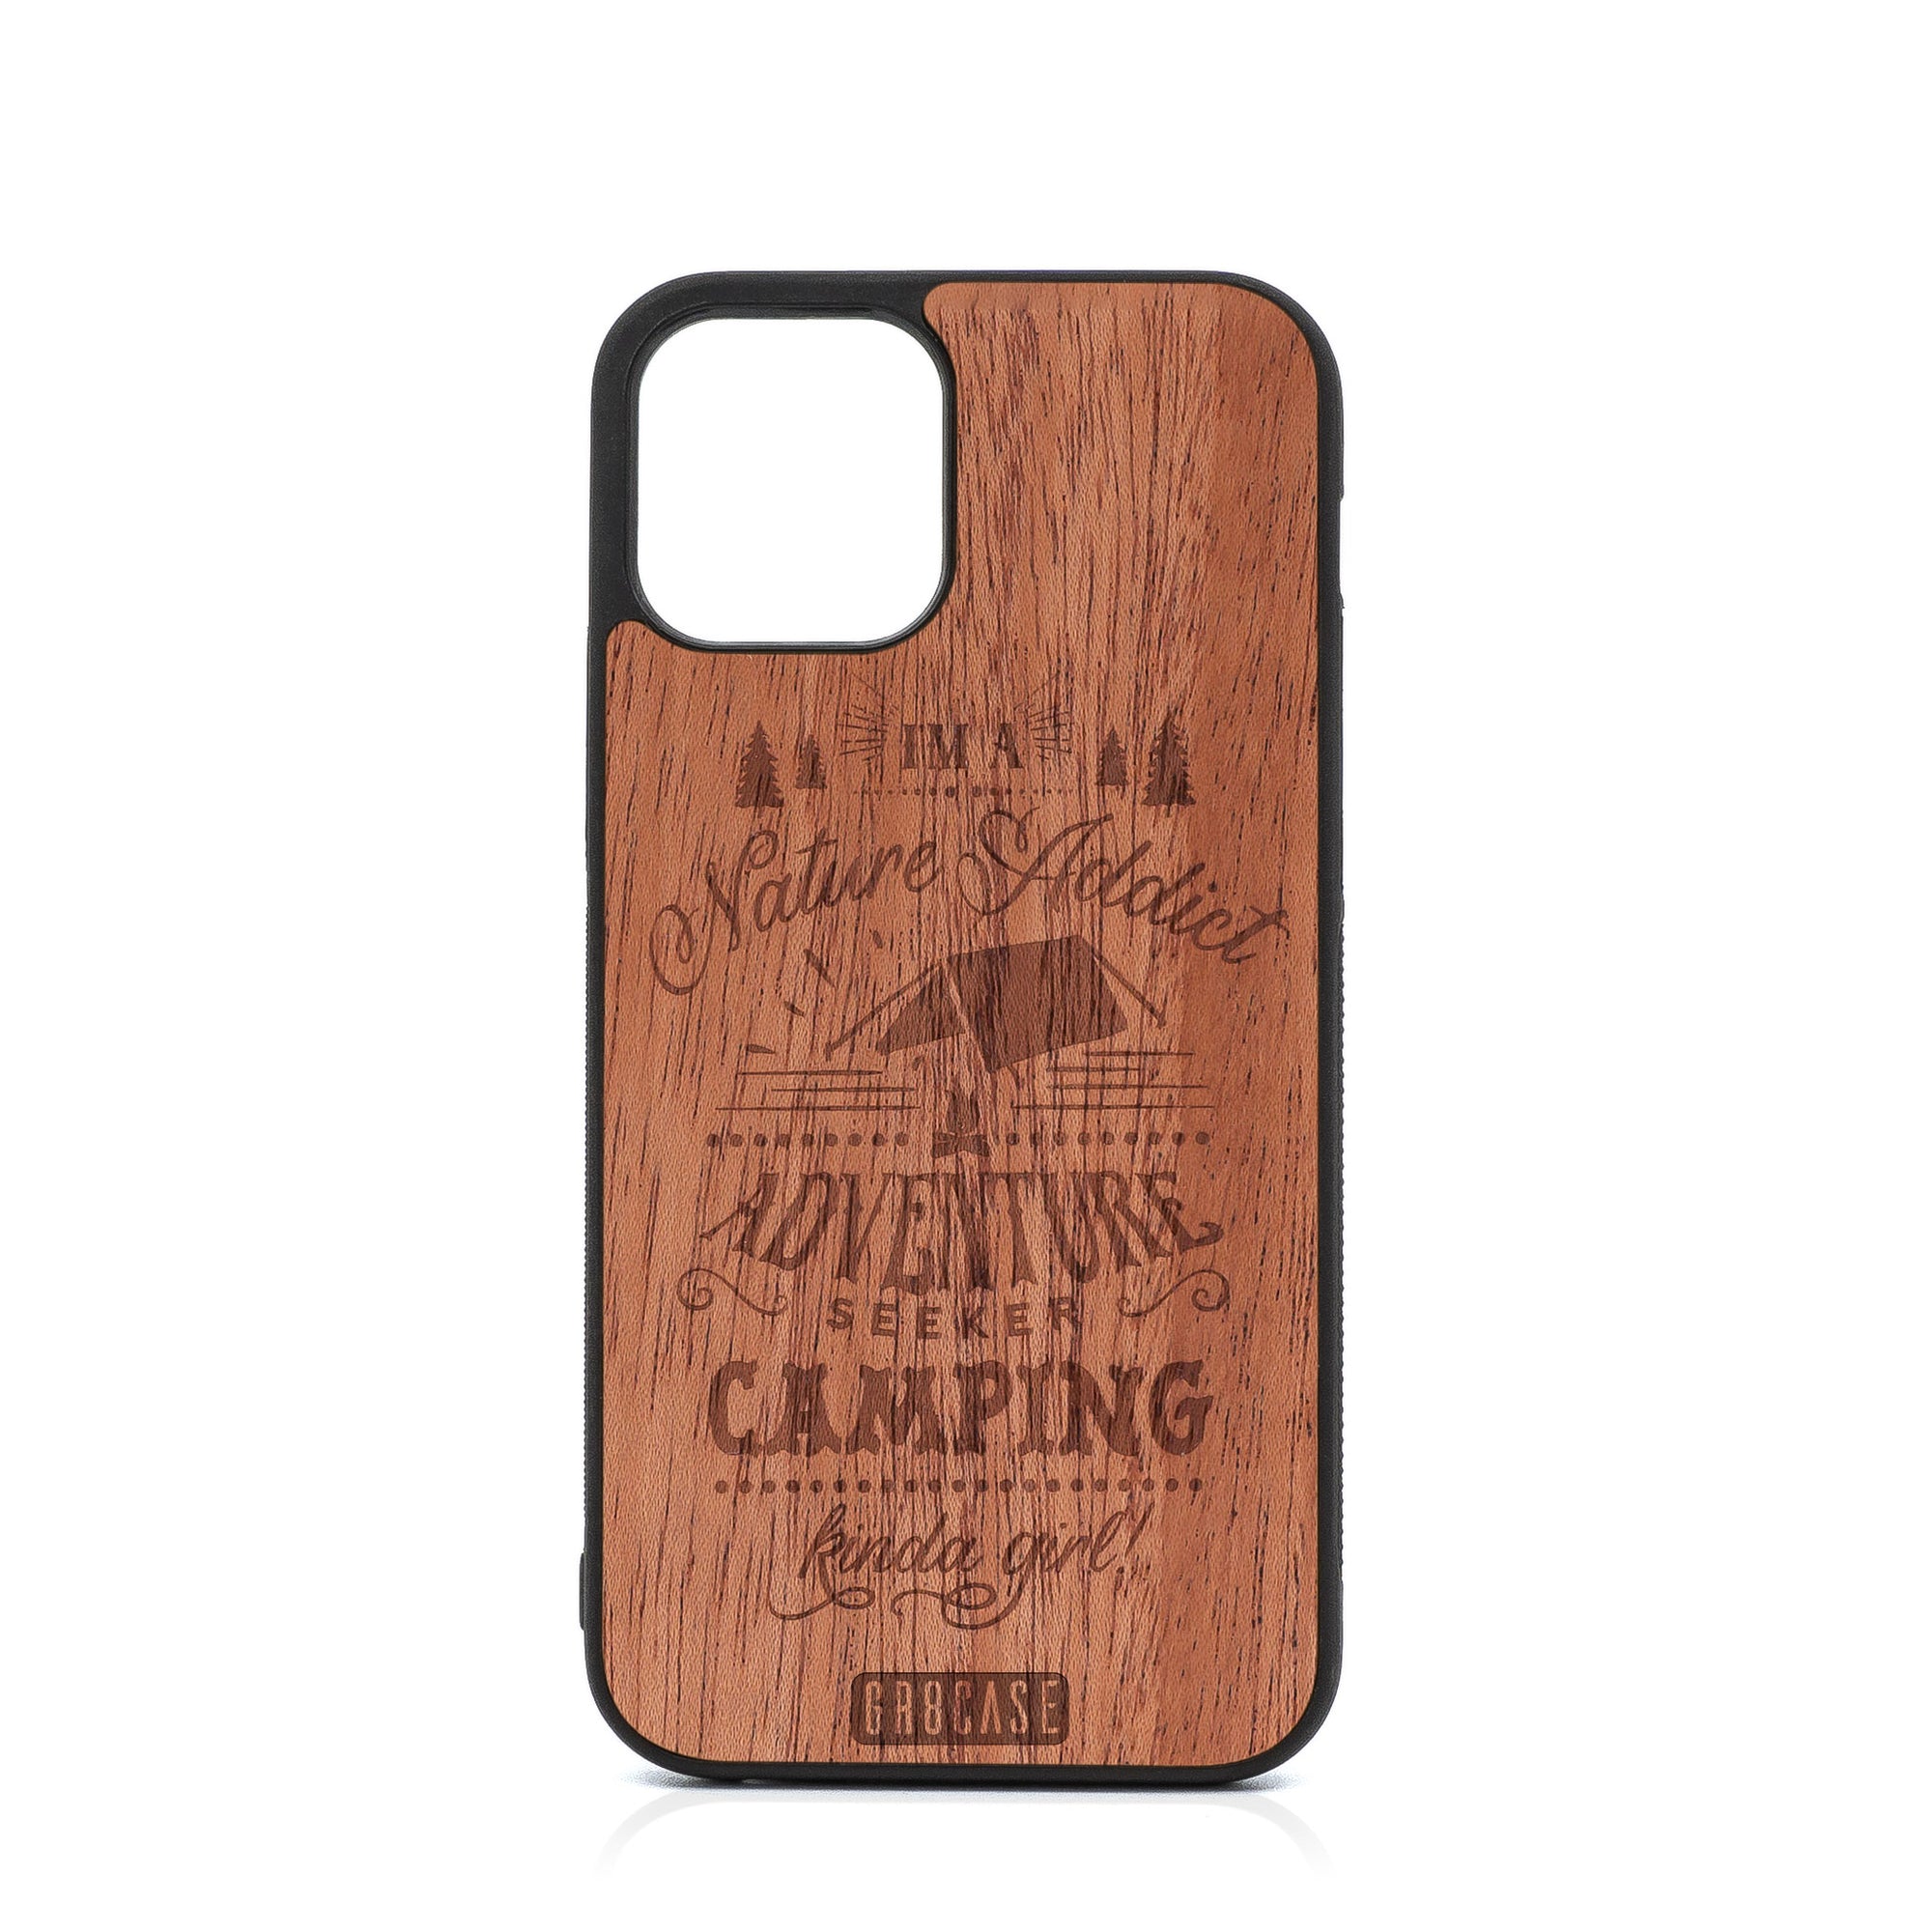 I'm A Nature Addict Adventure Seeker Camping Kinda Girl Design Wood Case For iPhone 12 Pro